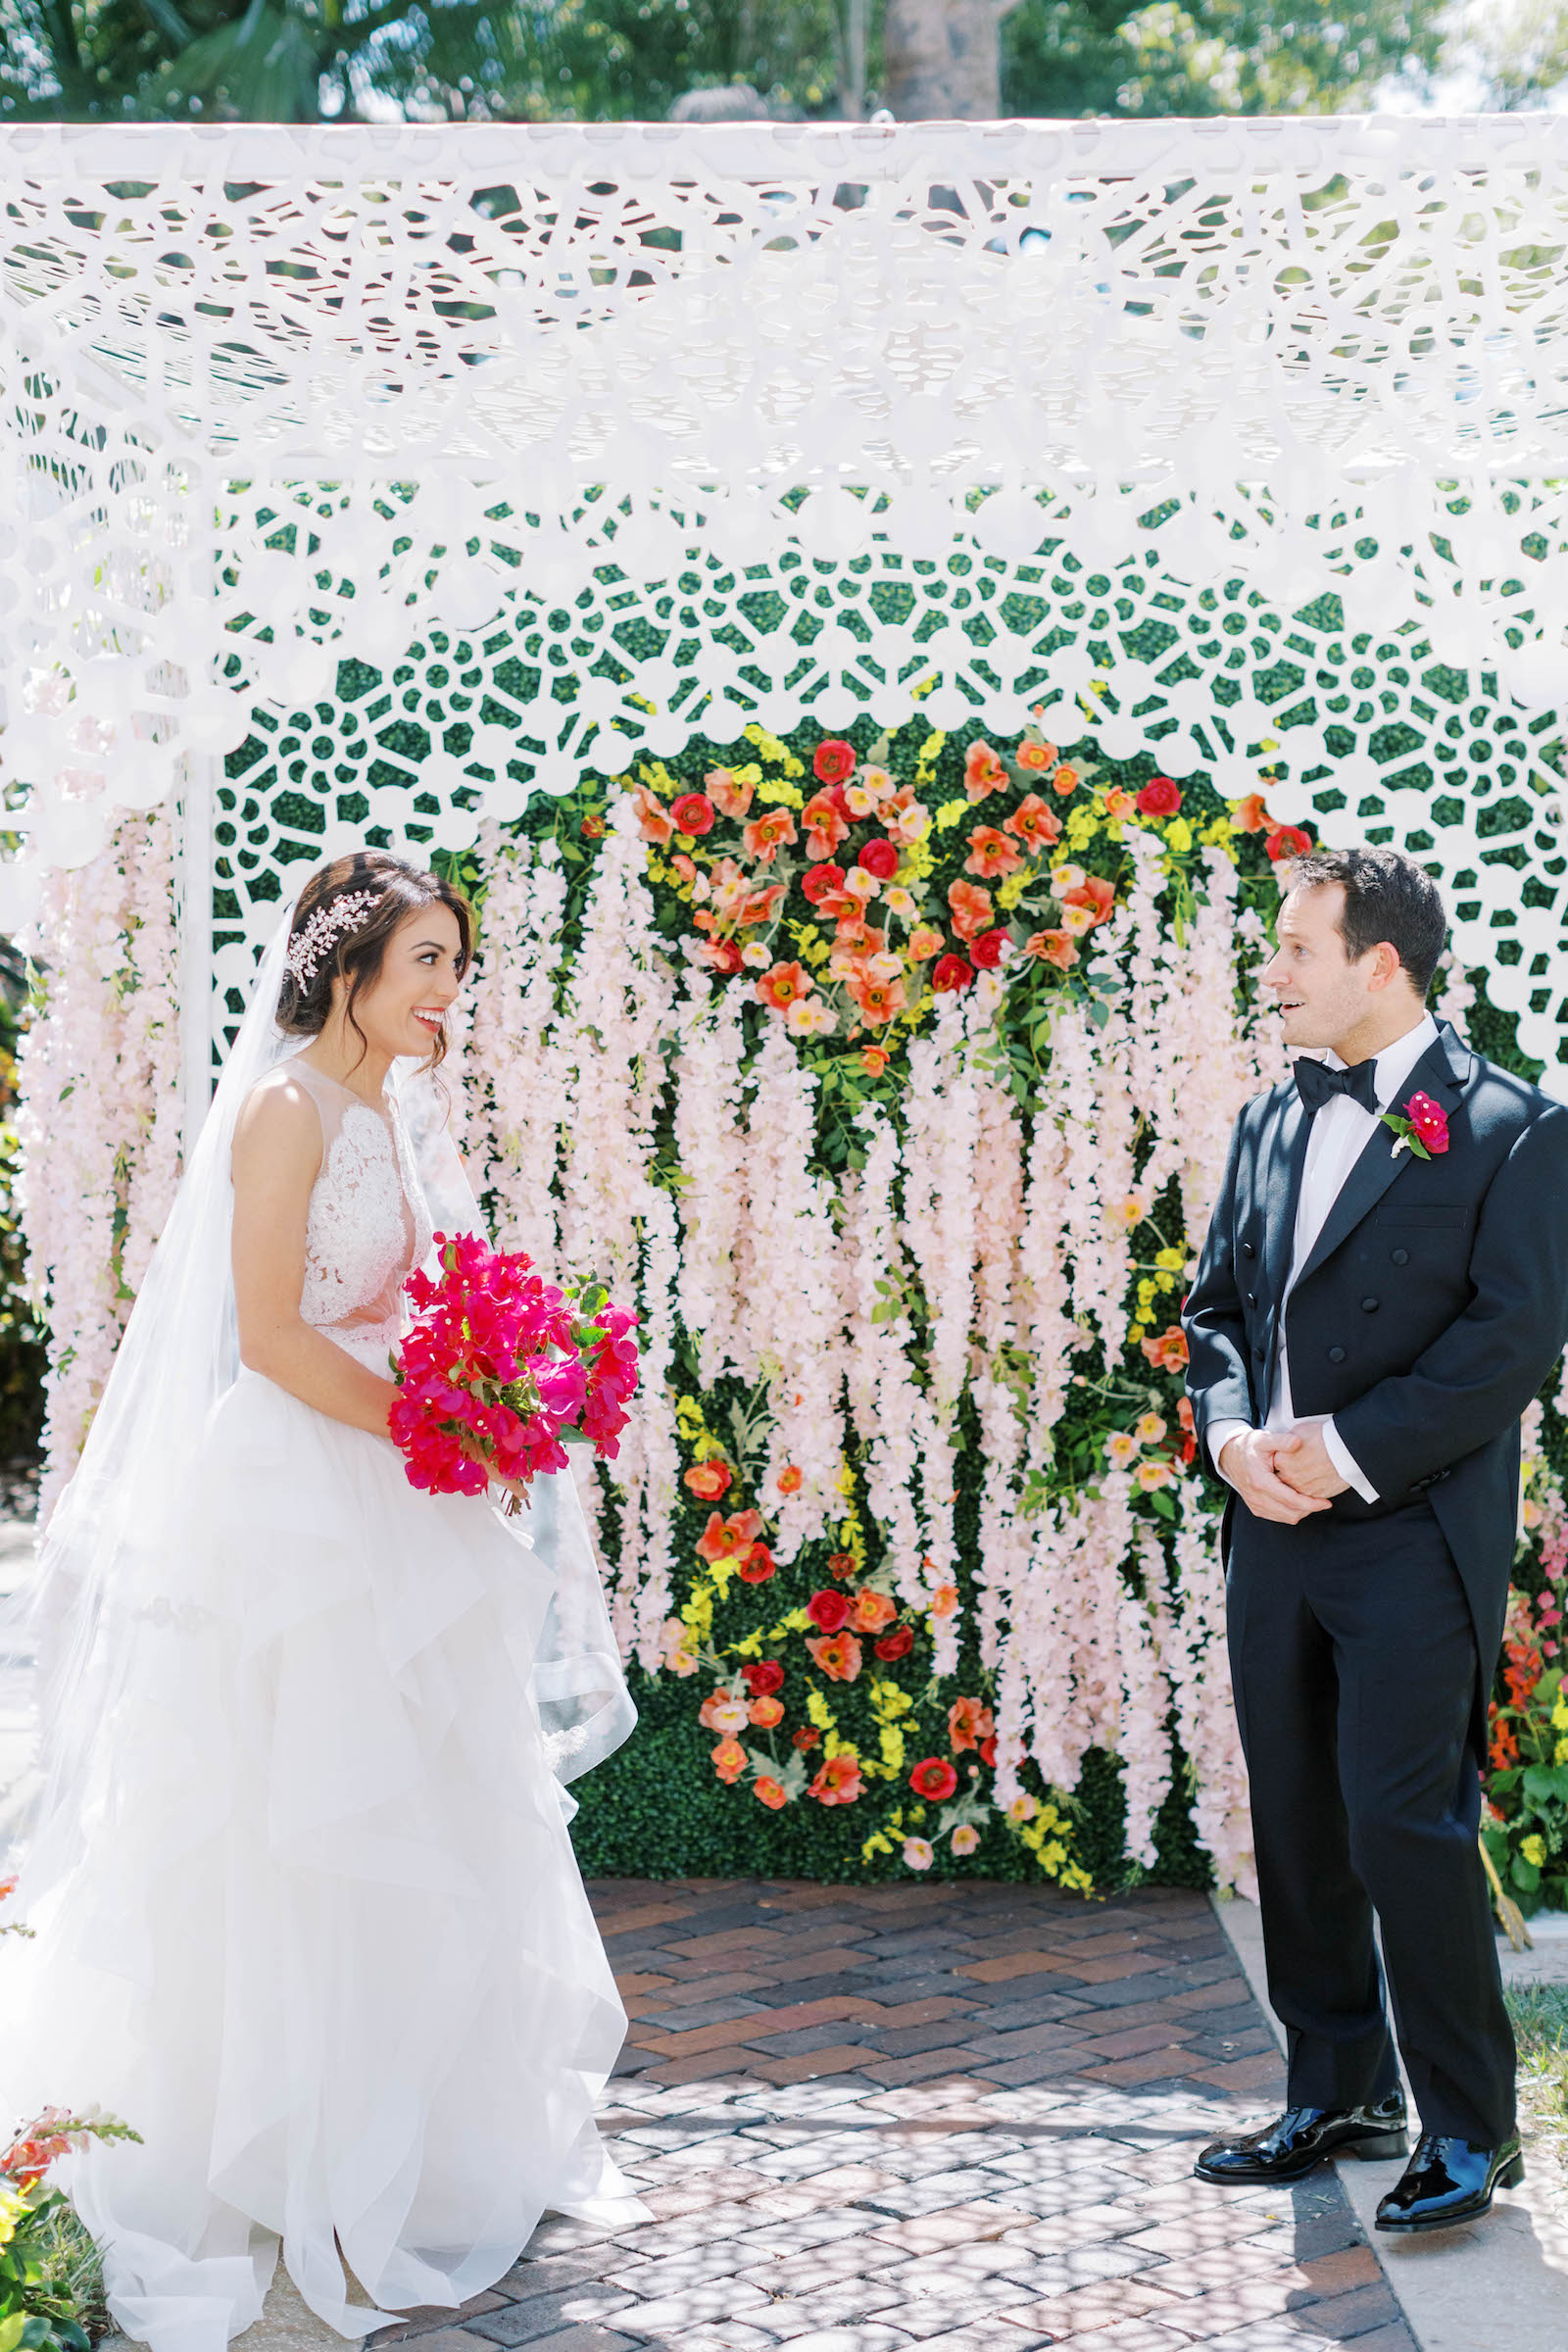 Bride and Groom First Look Wedding Portrait | Floral Archway with Pink, Orange, and Yellow Flowers and Greenery Detailing | Wedding Planner St. Petersburg Parties a la Carte